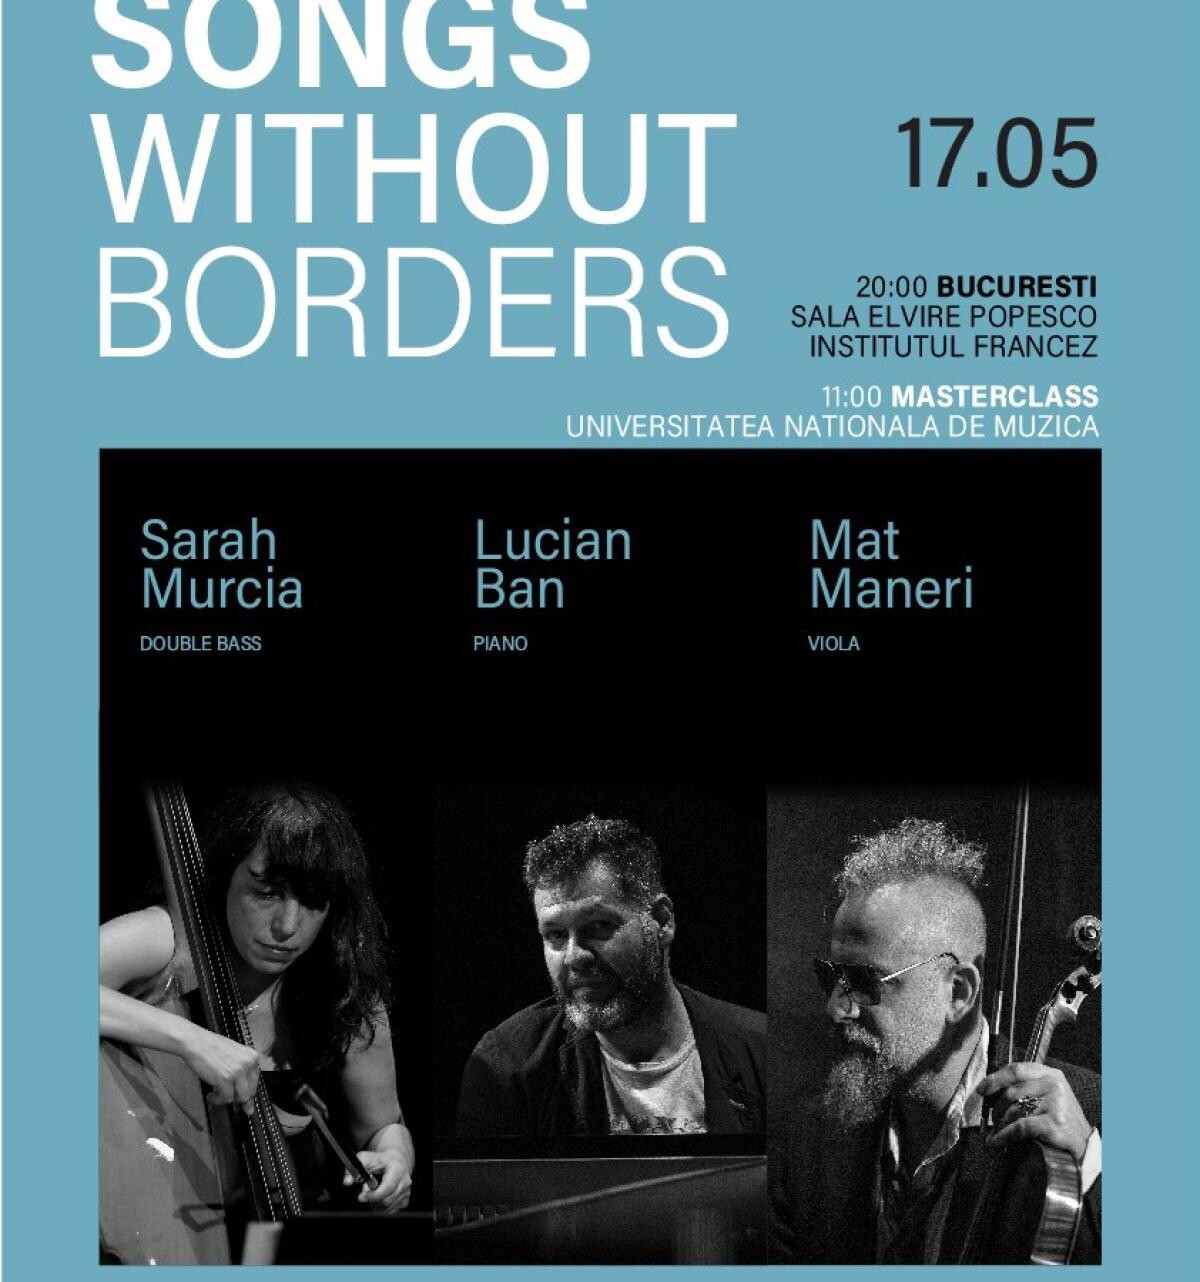 SONGS WITHOUT BORDERS - Lucian Ban, Sarah Murcia, Mat Maneri a Romanian-French-American Jazz Connection